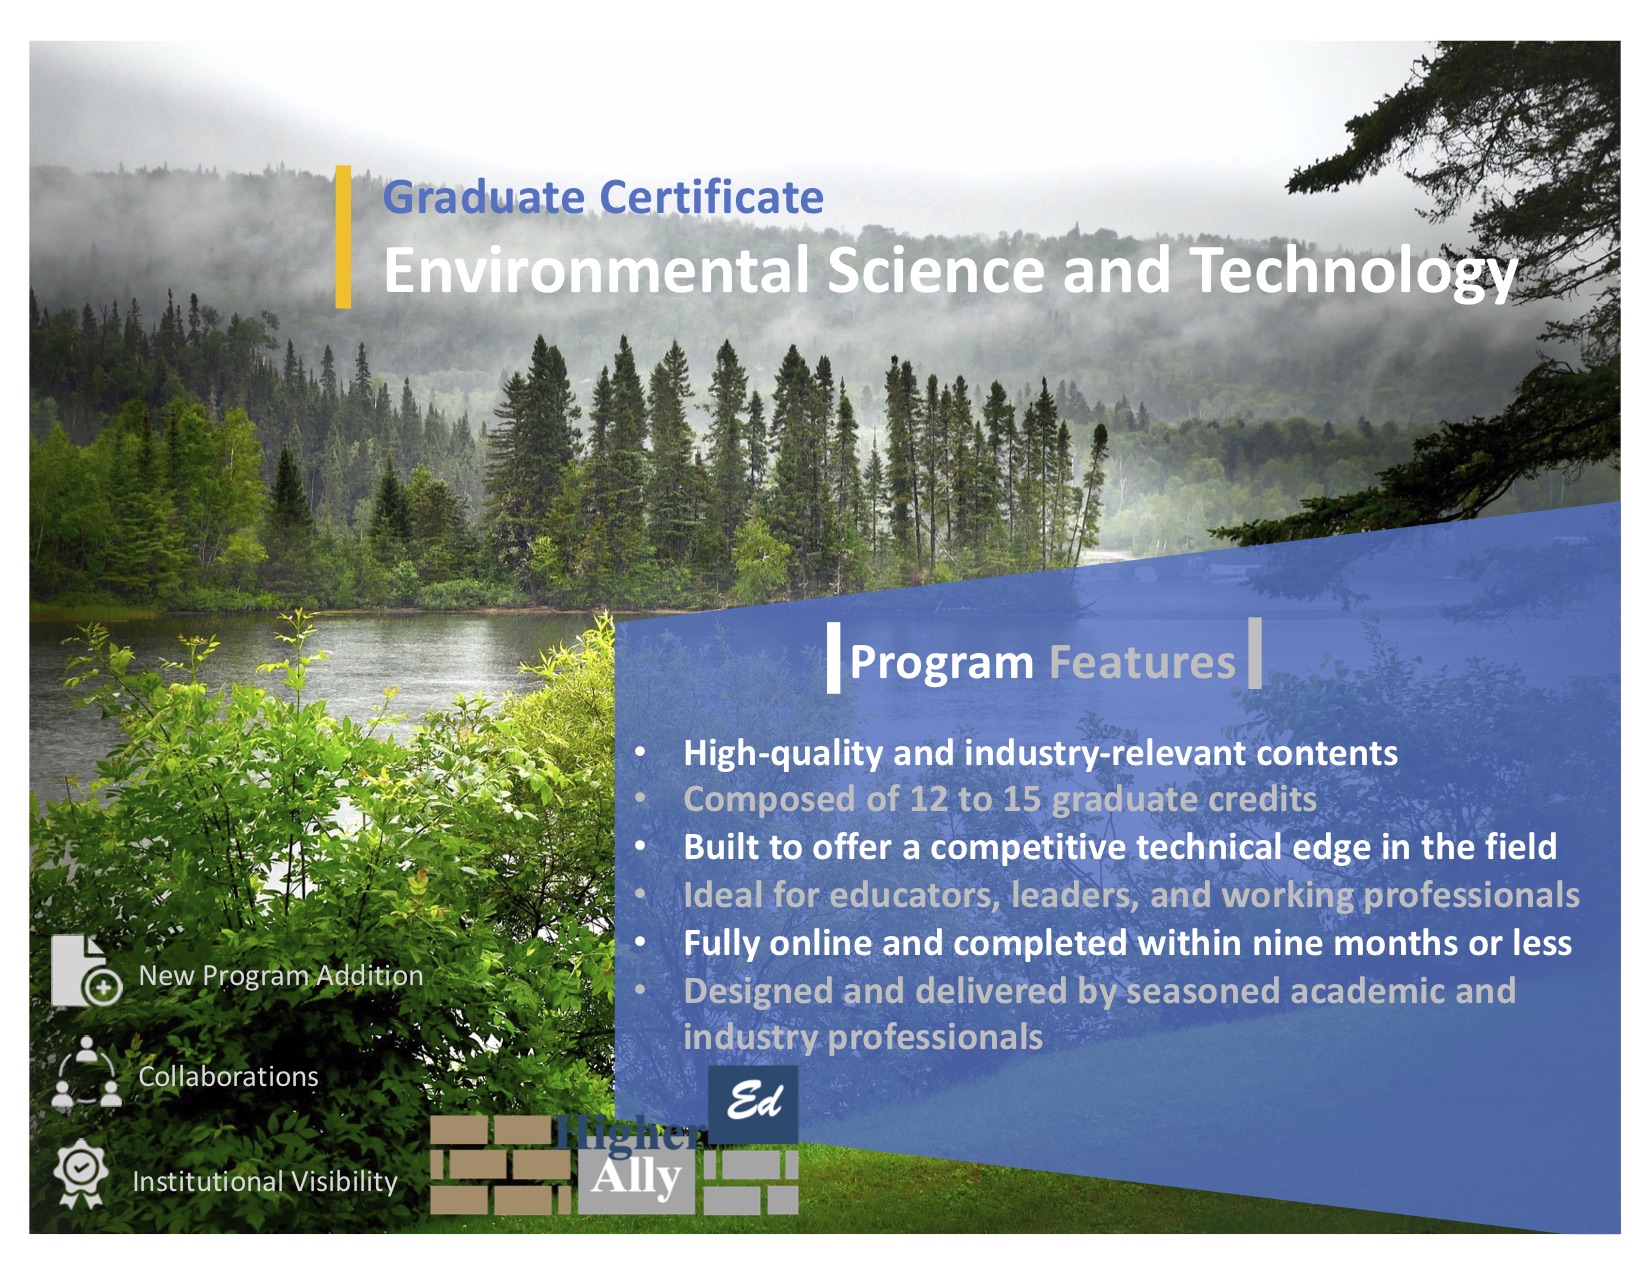 GC_Env.Science_Technology